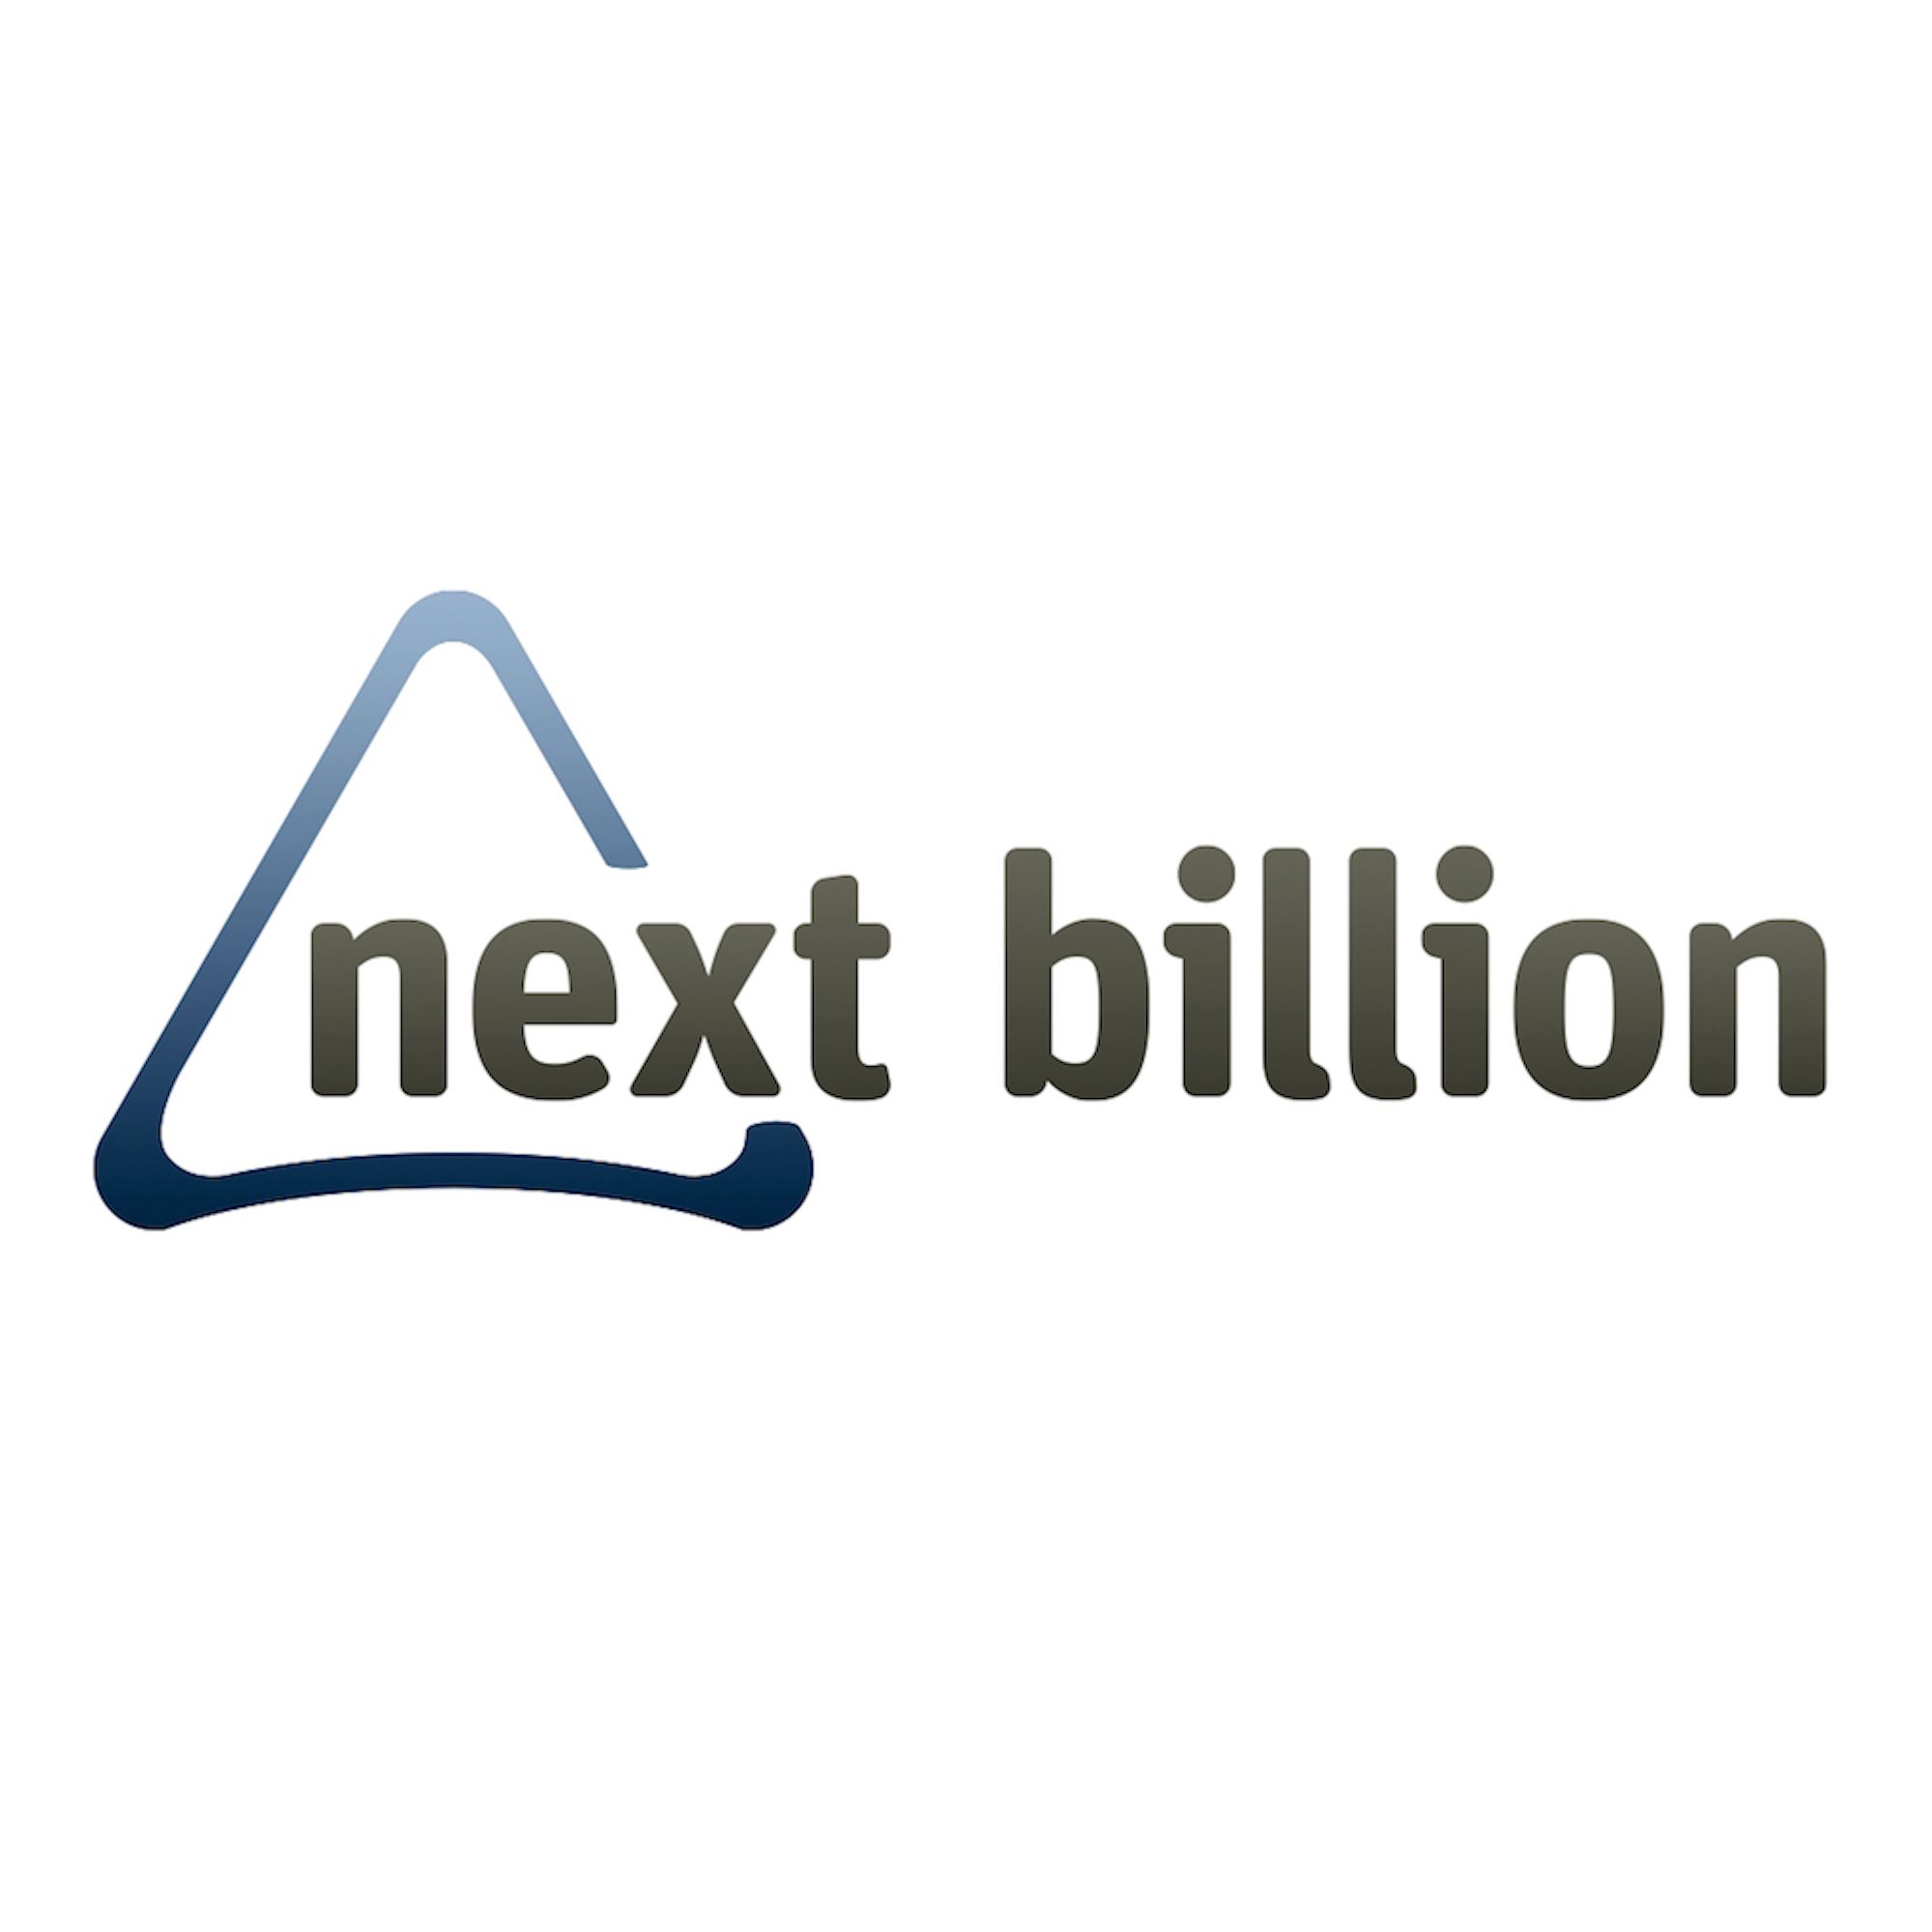 NextBillion Podcasts: Q&As with Leaders in Social Business